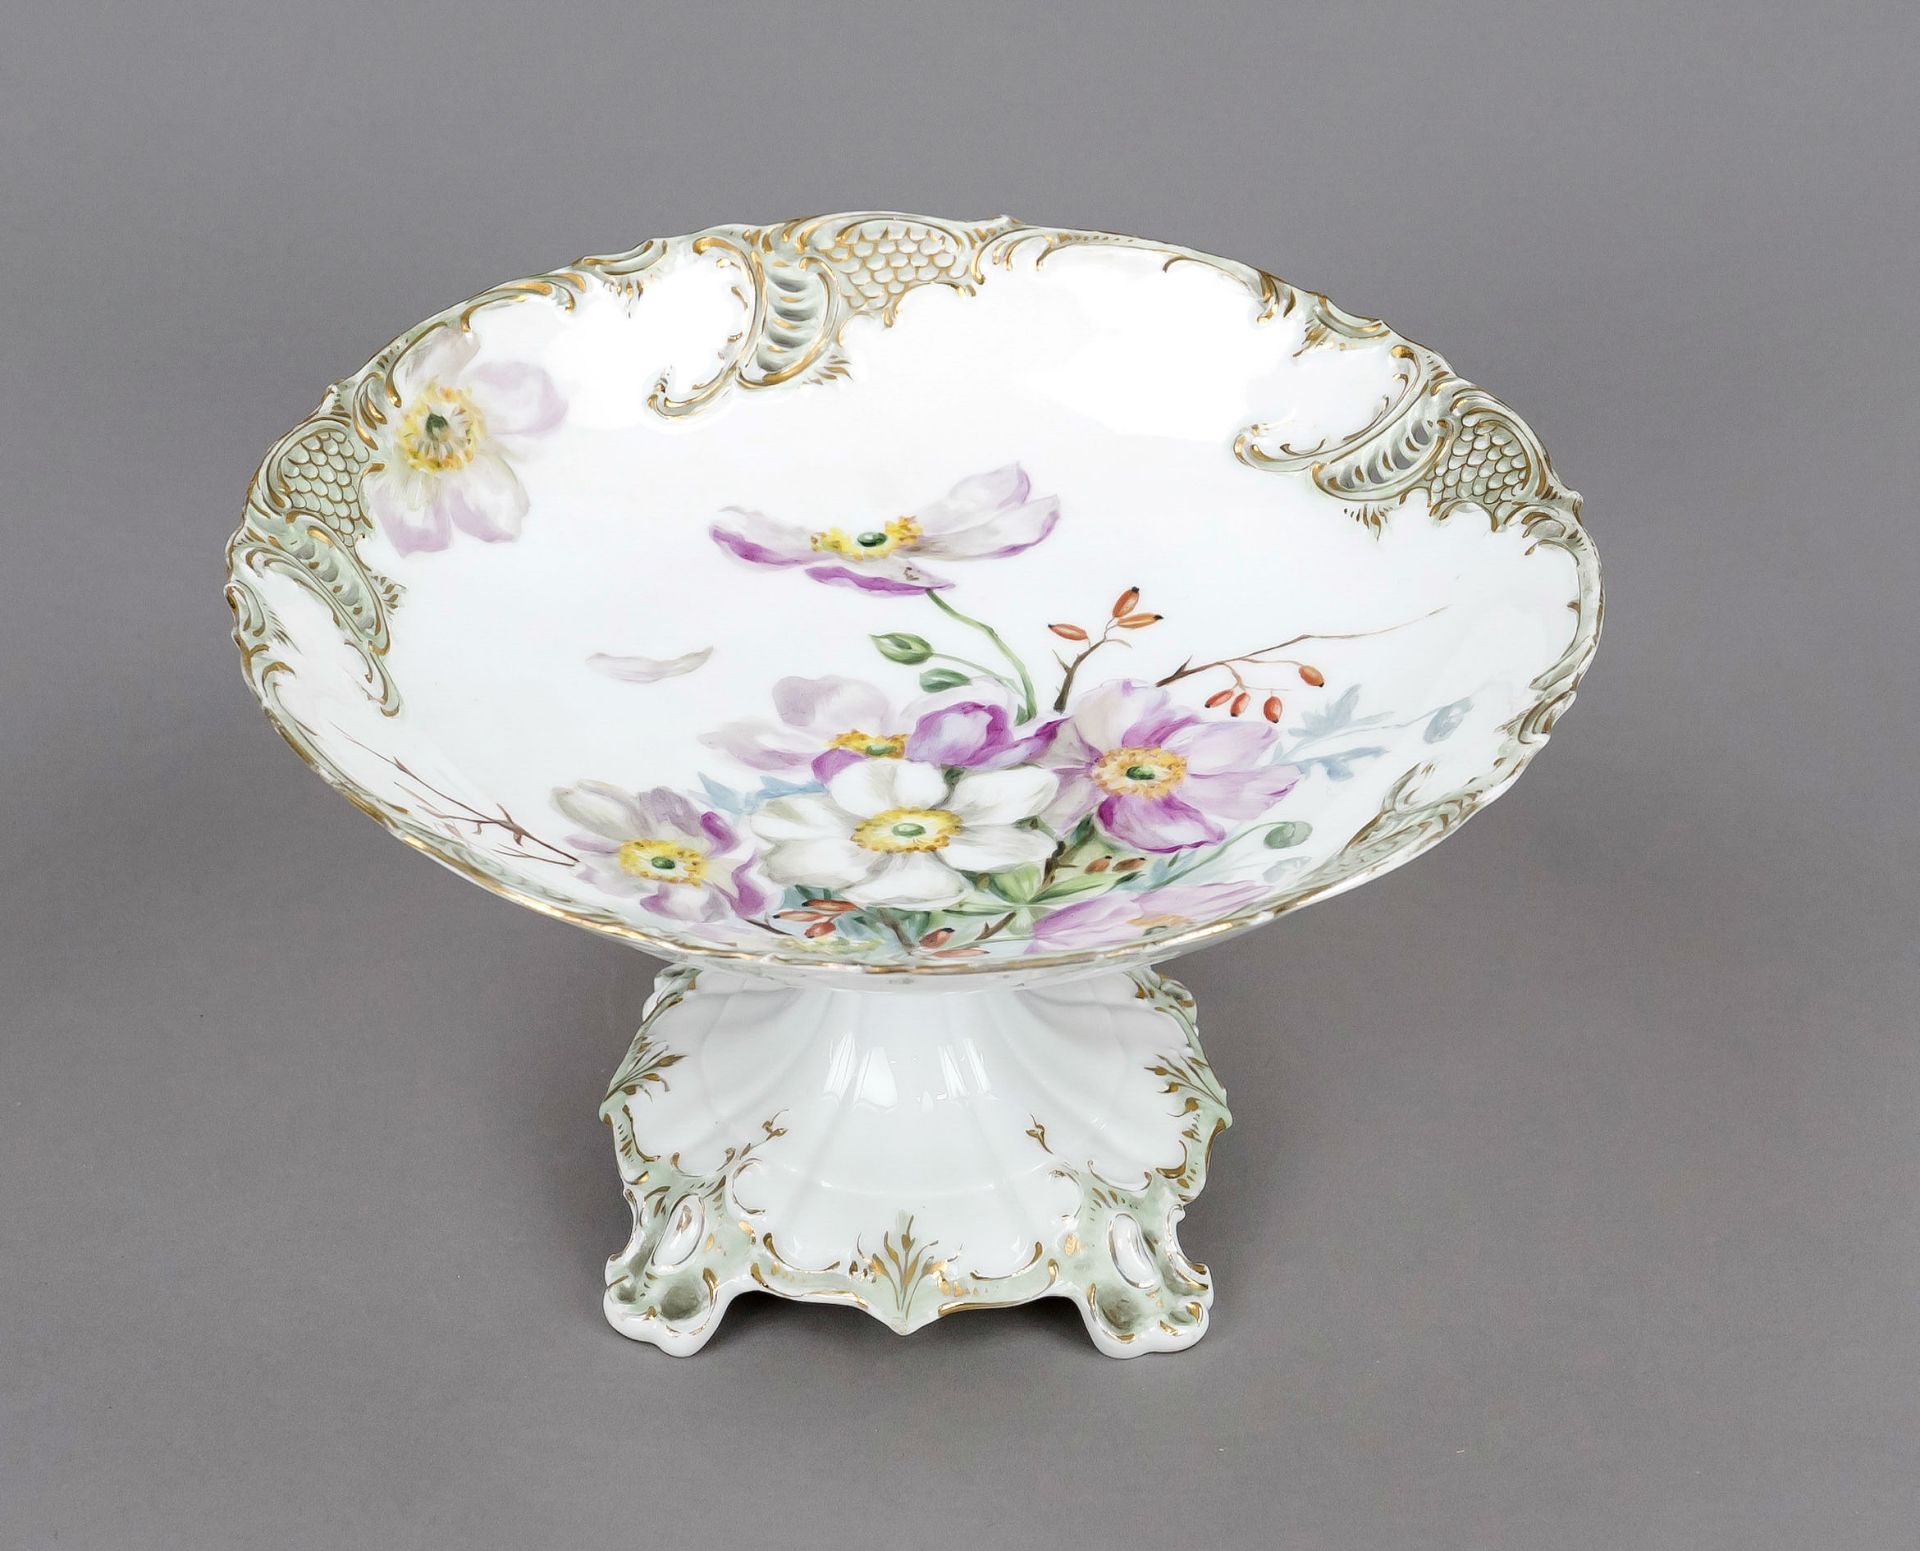 Round centerpiece, Nymphenburg, 20th century, round curved stand, on 4 feet, shallow dish with